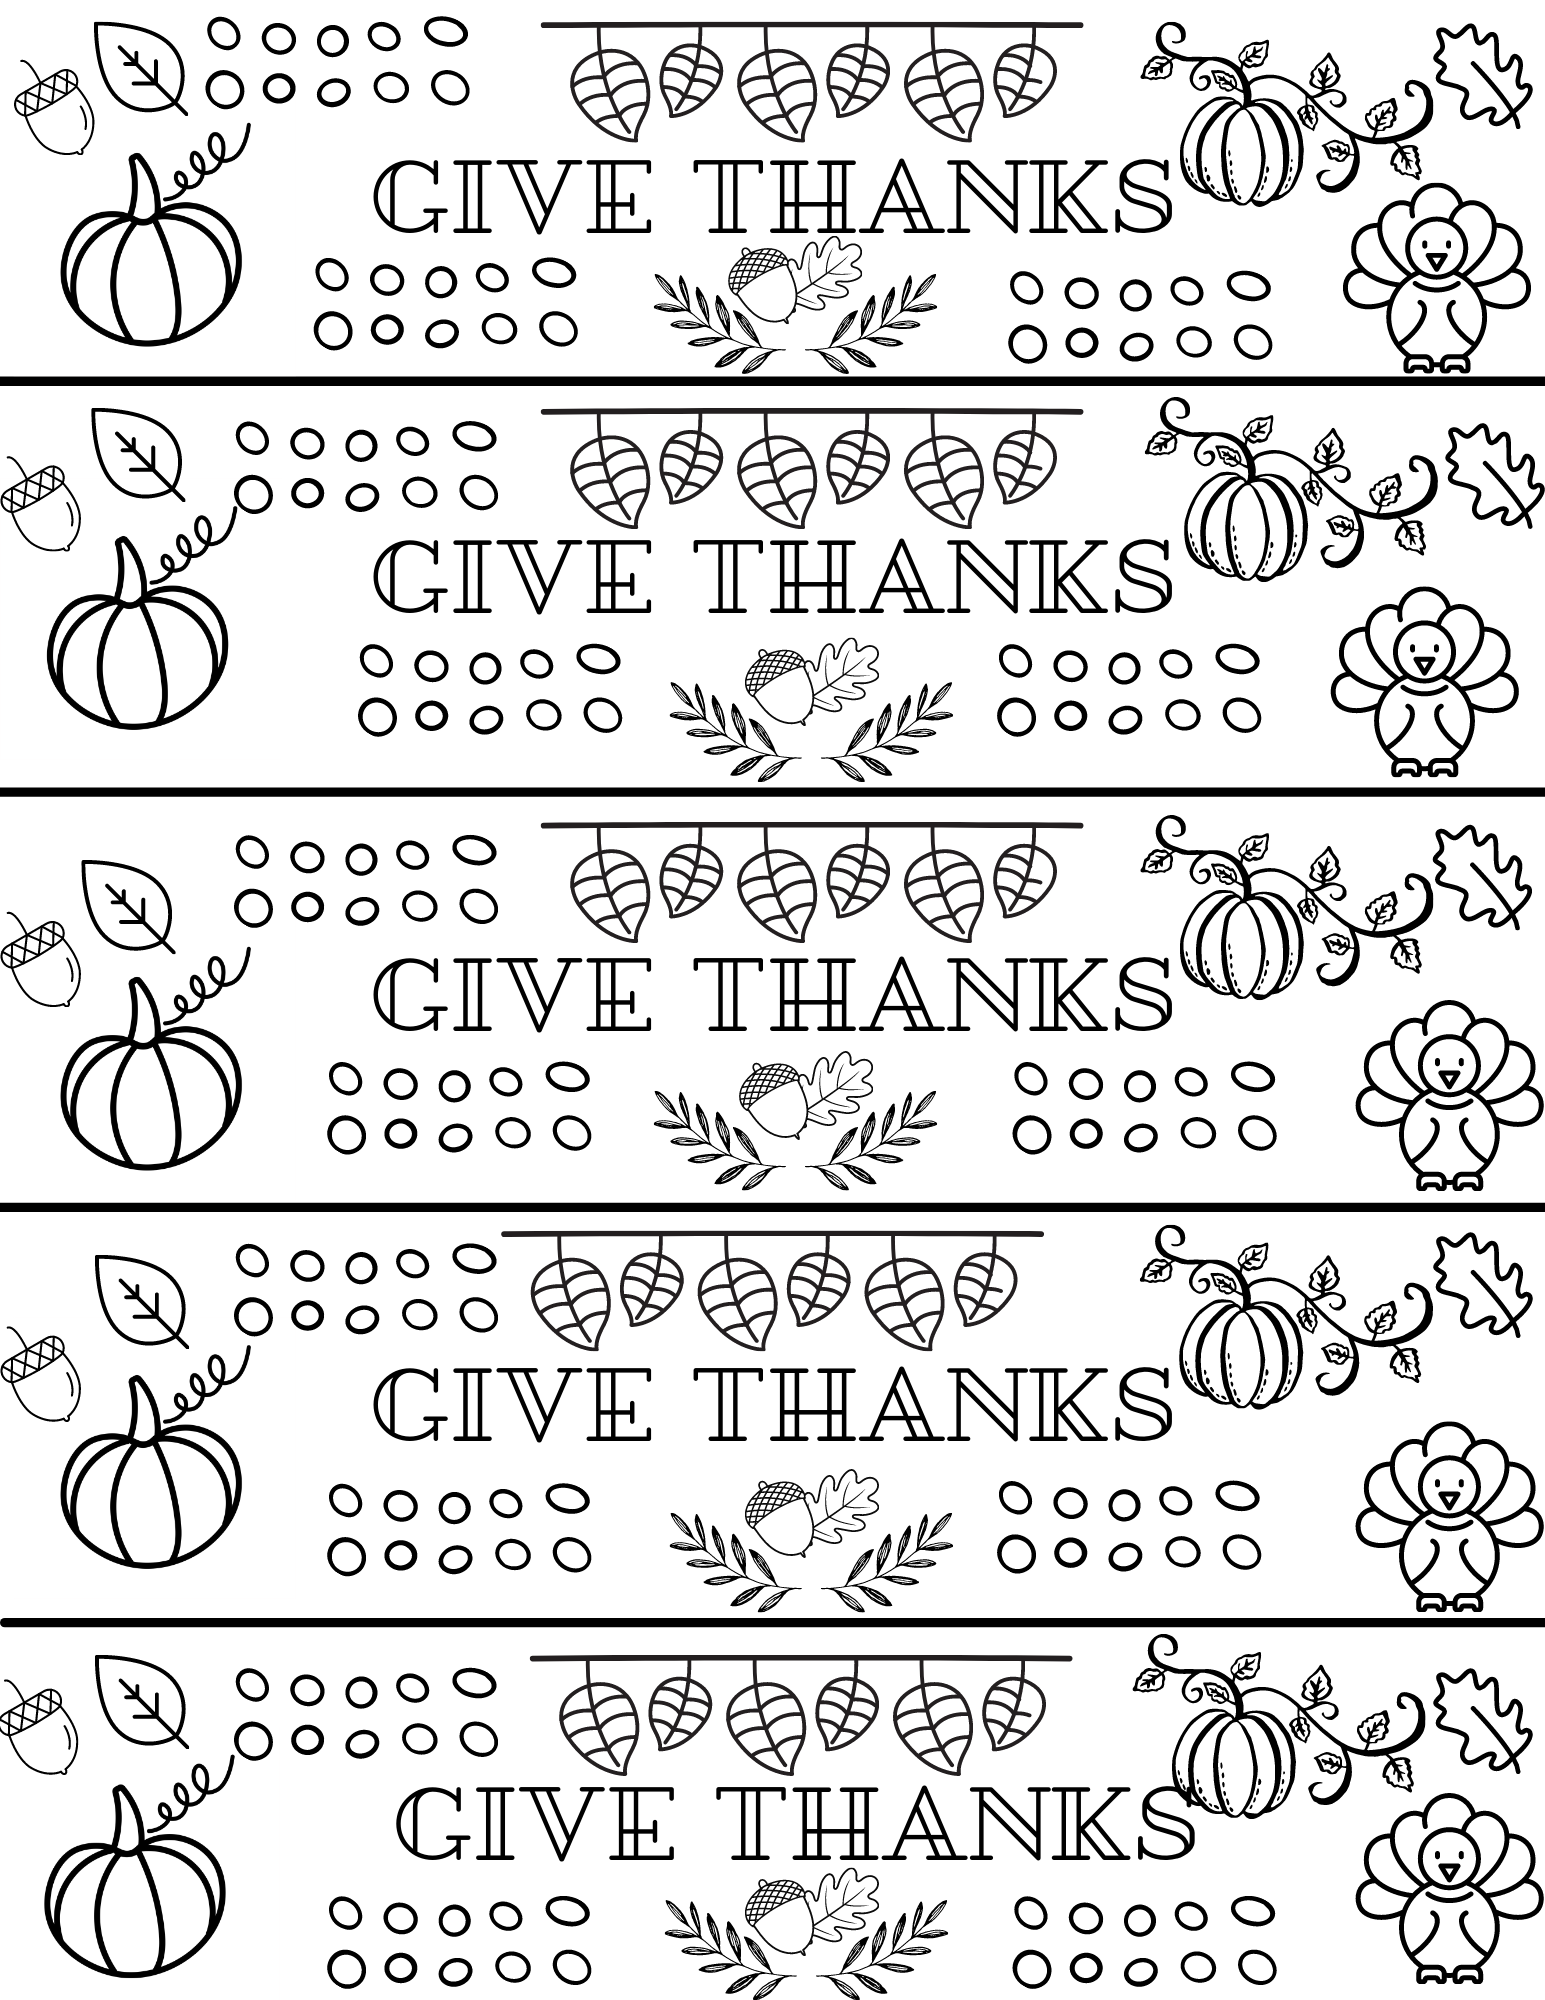 Give Thanks Bookmarks To Color For Thanksgiving Seeing Dandy Blog